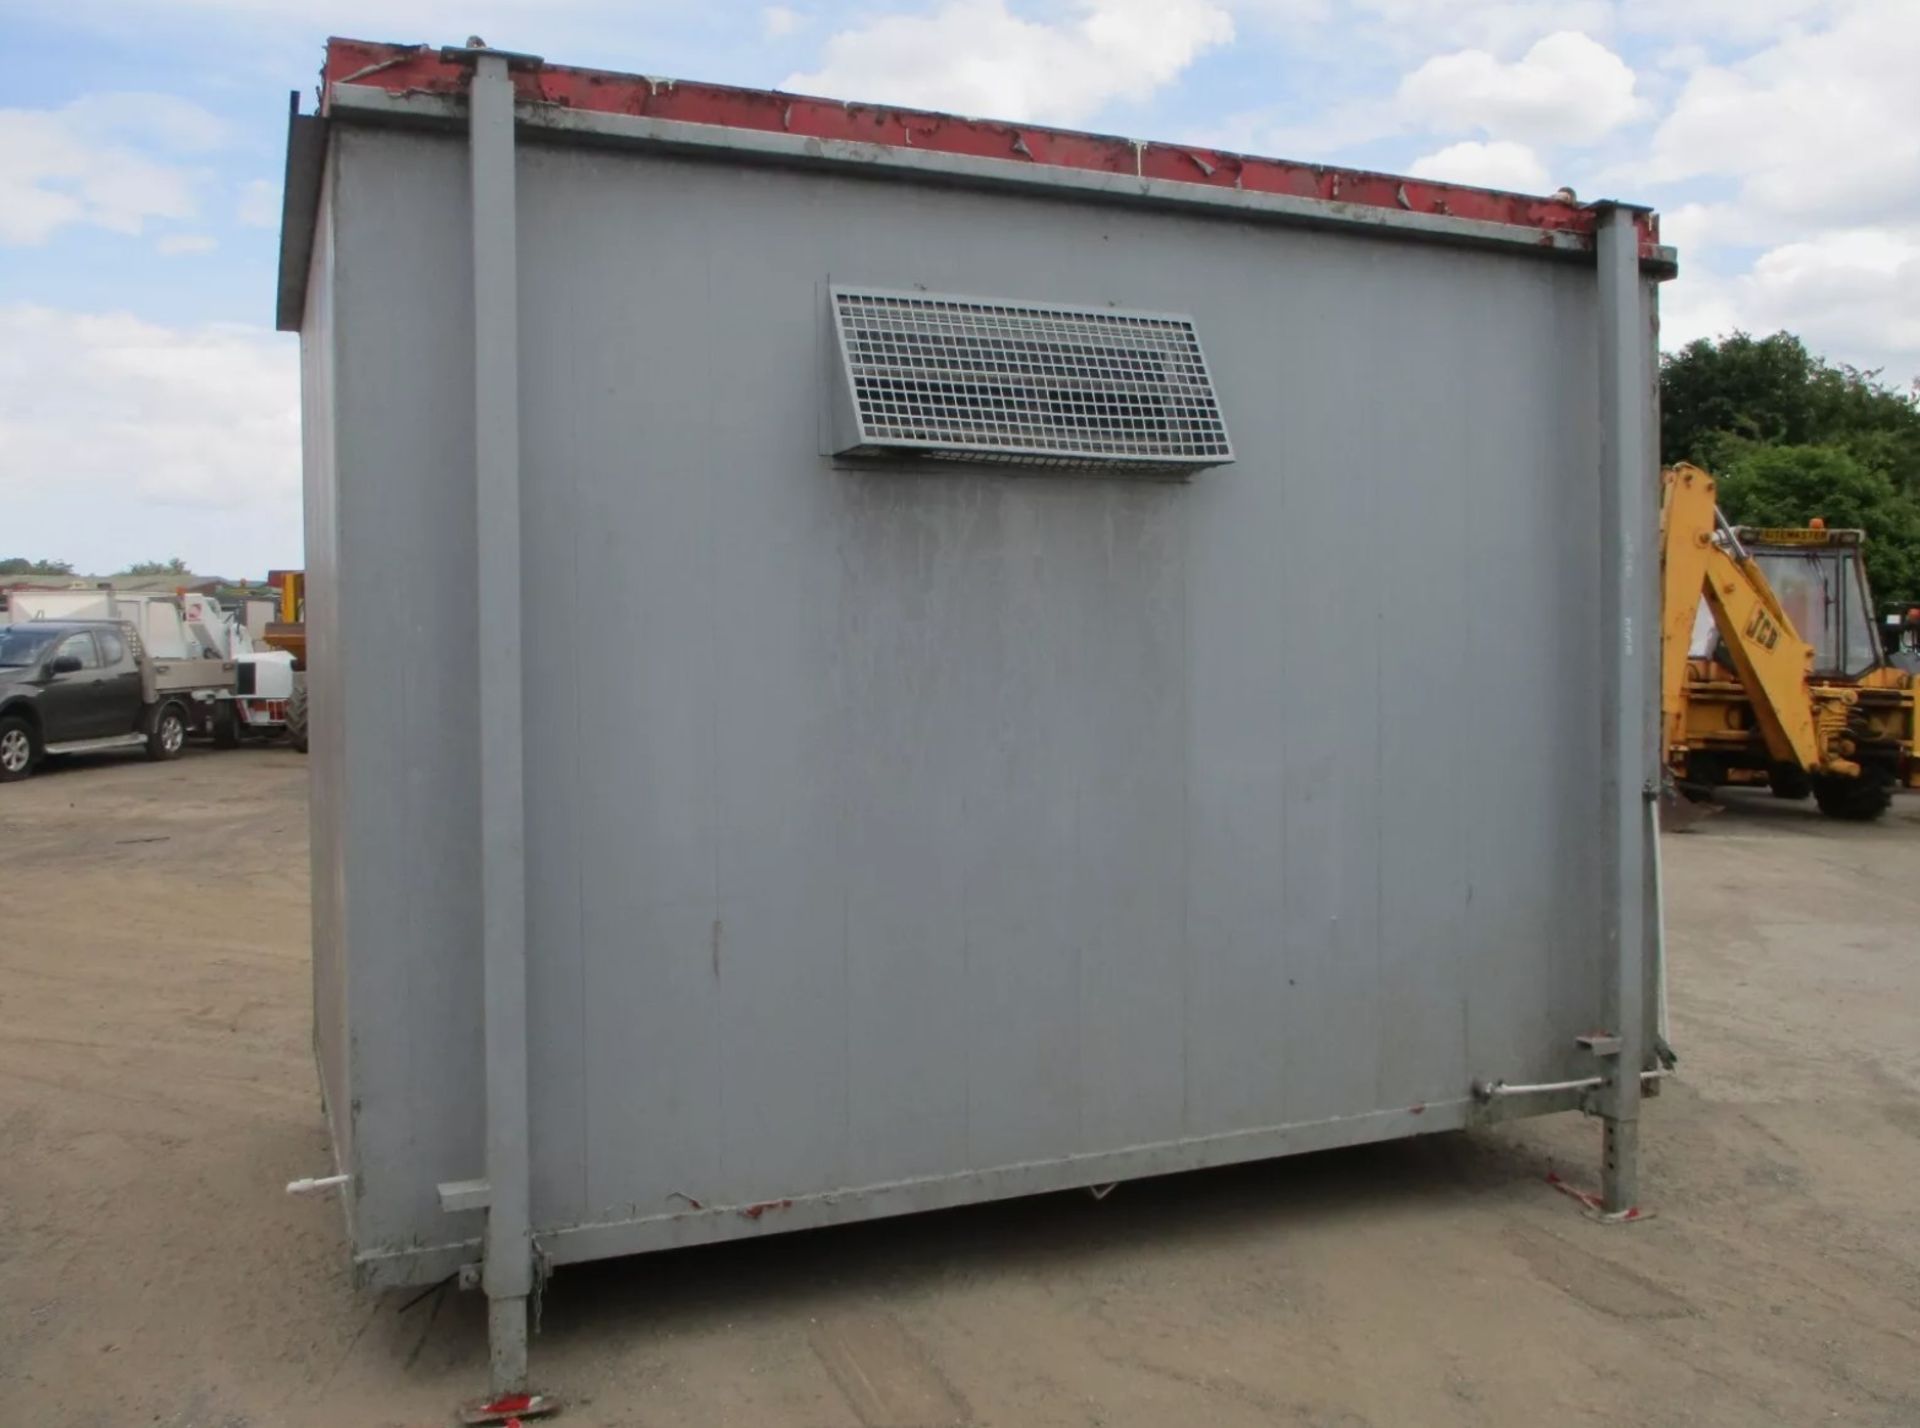 SHIPPING CONTAINER TOILET BLOCK: YOUR PORTABLE SANITATION SOLUTION - Image 2 of 11